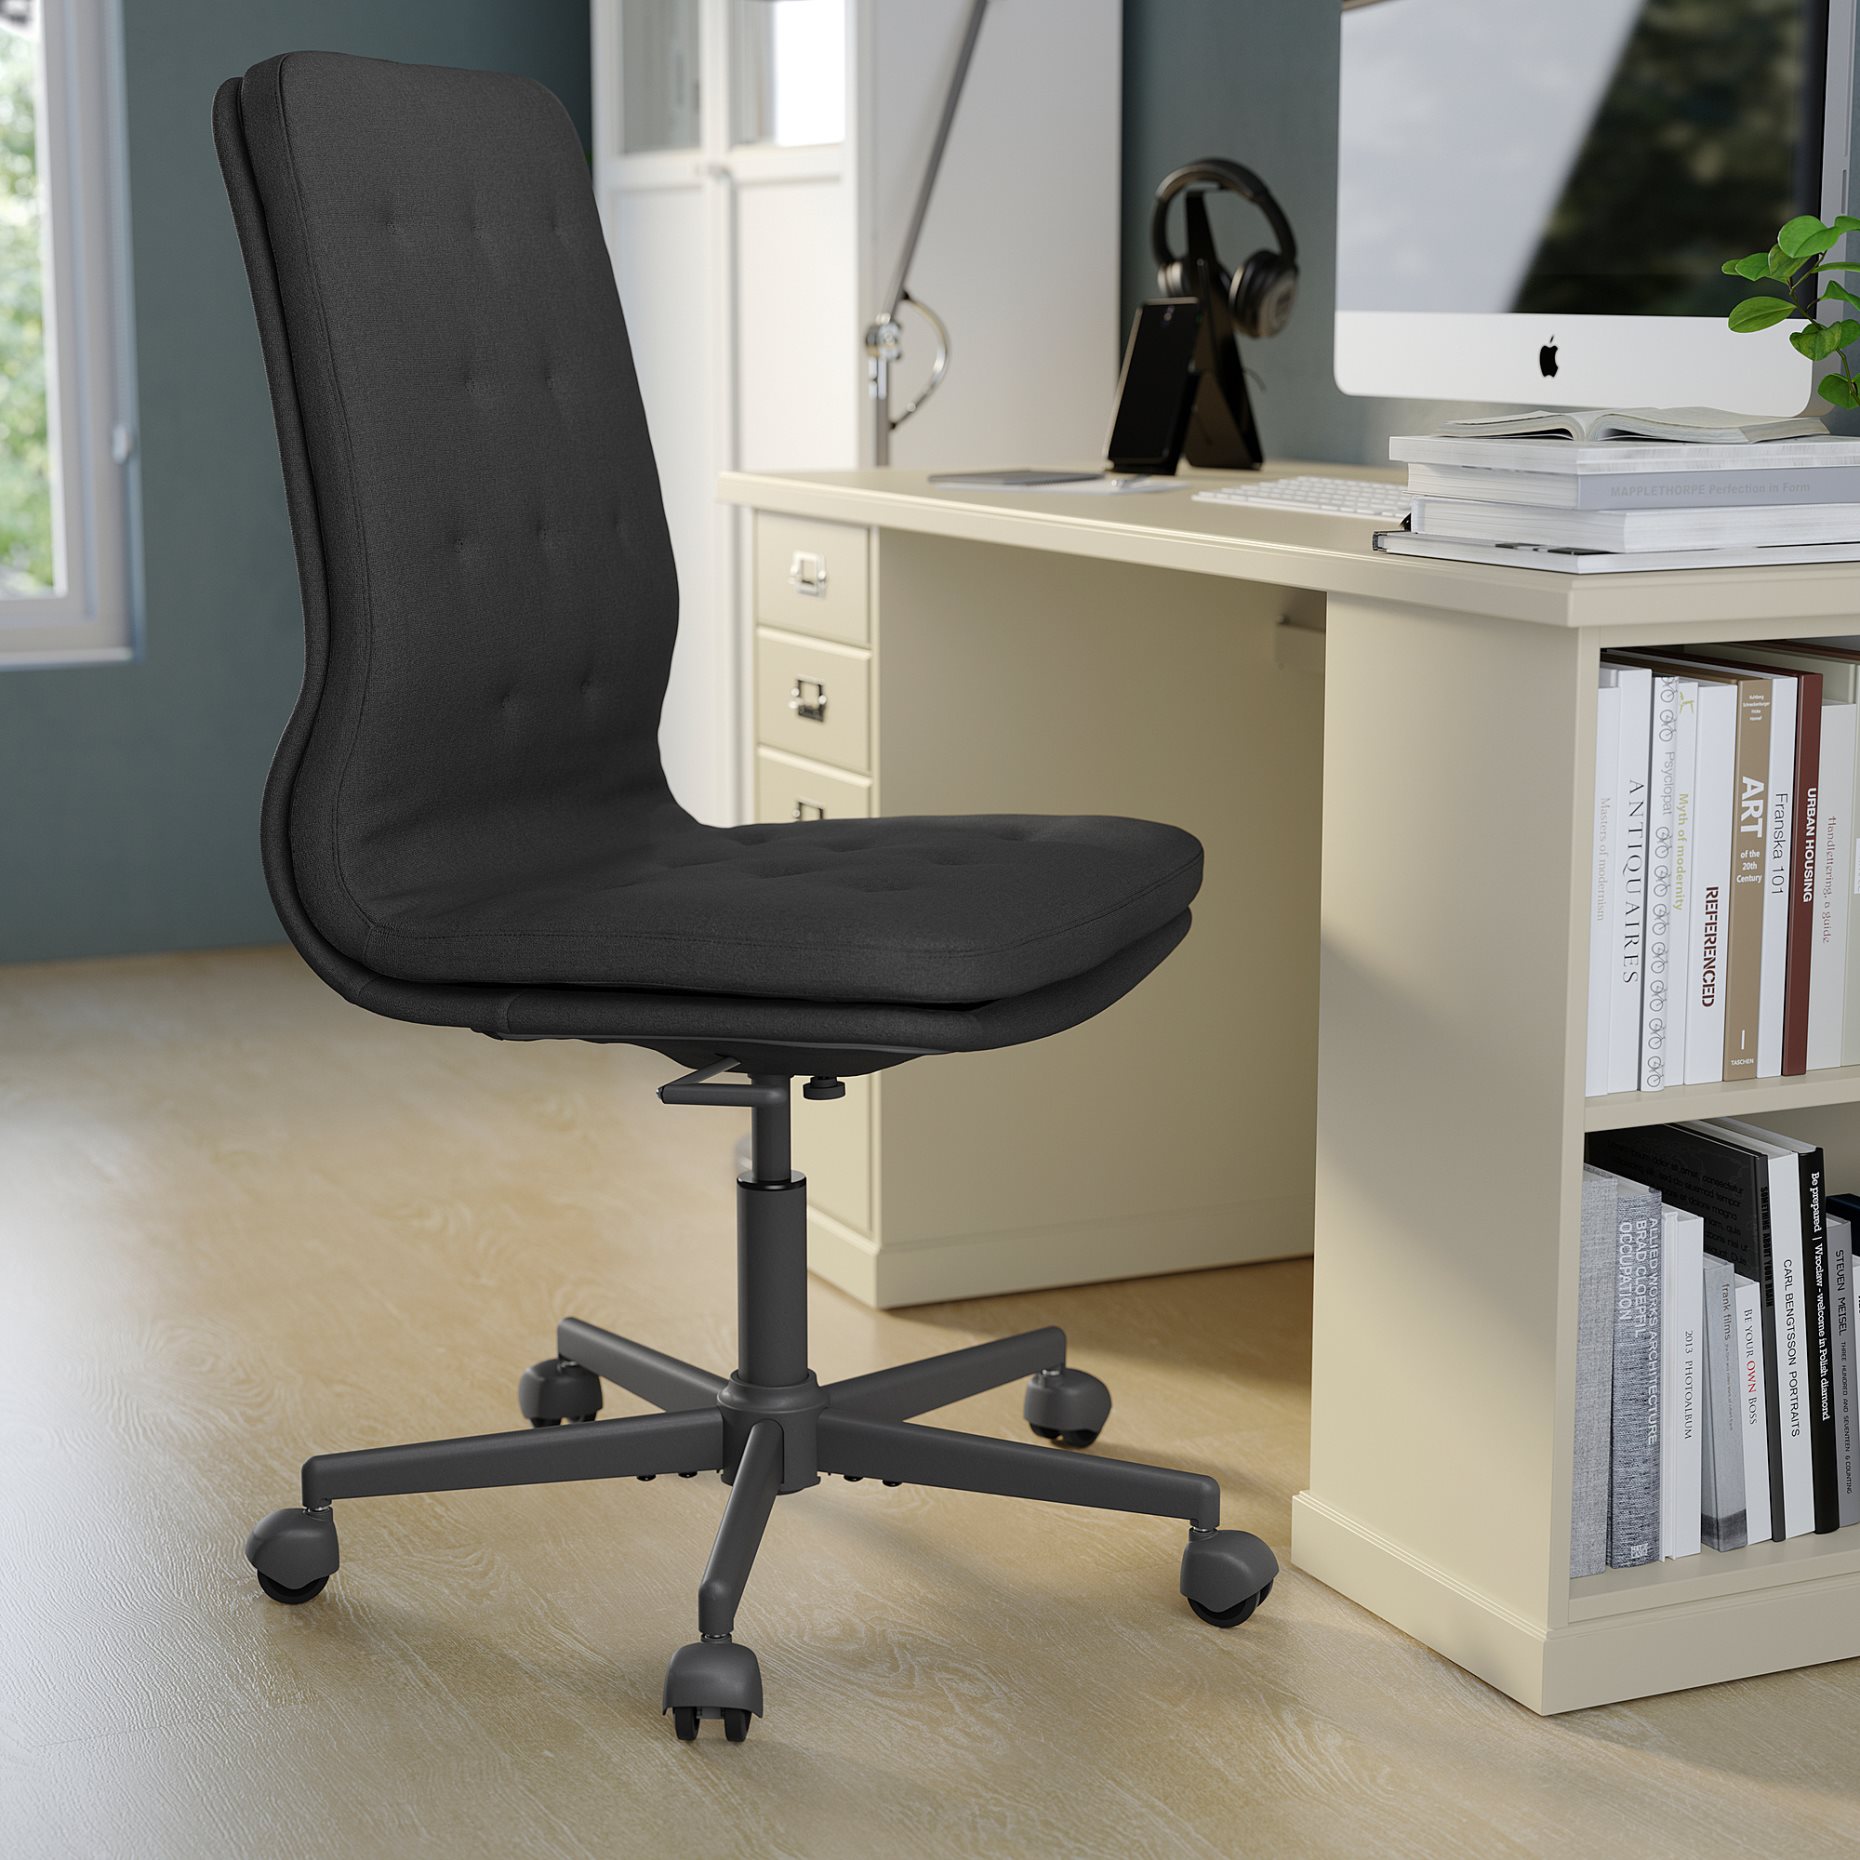 MULLFJÄLLET, conference chair with castors, 804.724.92